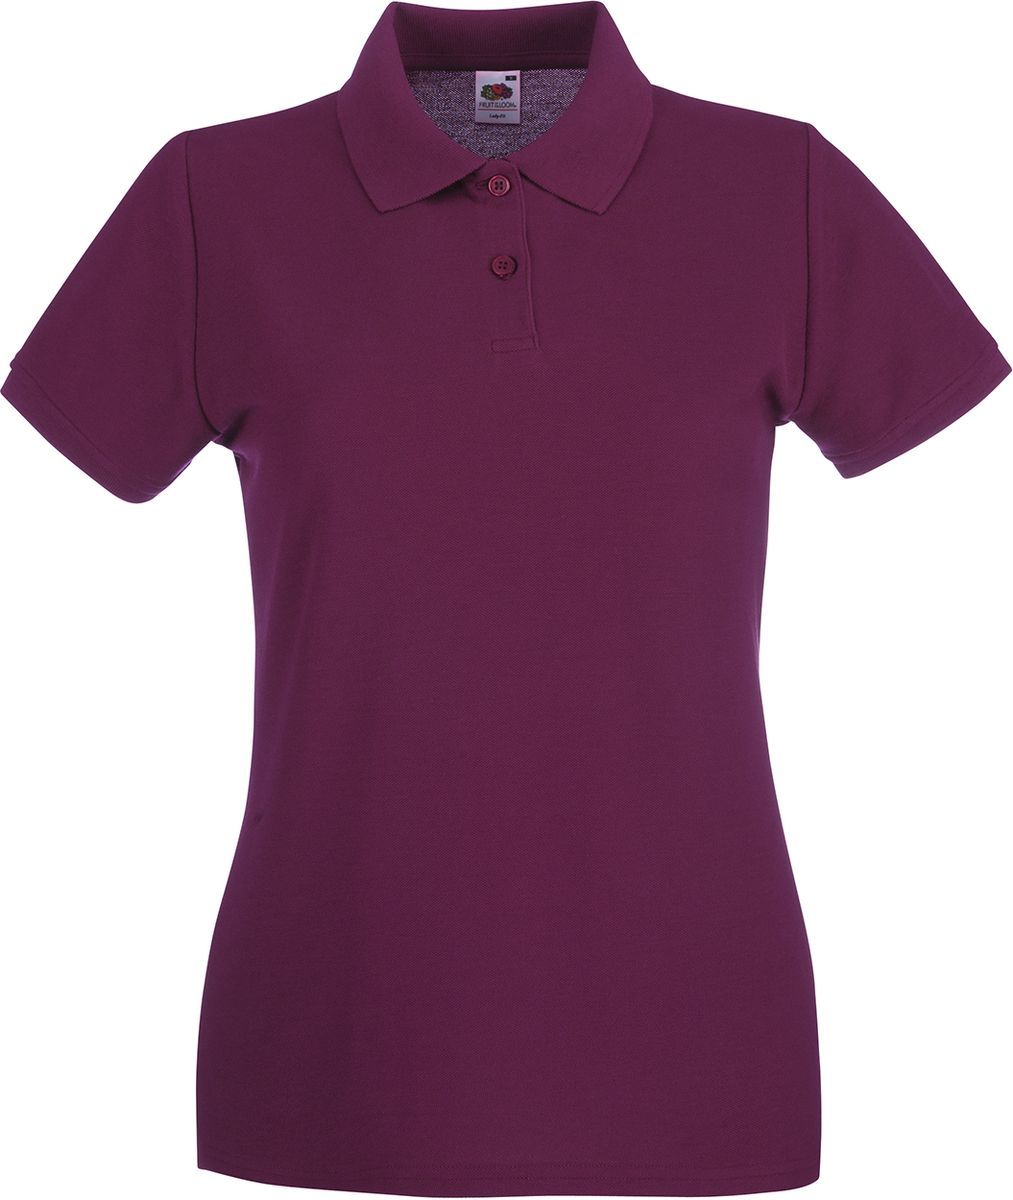 Lady-Fit Premium Polo Fruit of the Loom 63-030-0 Burgundy